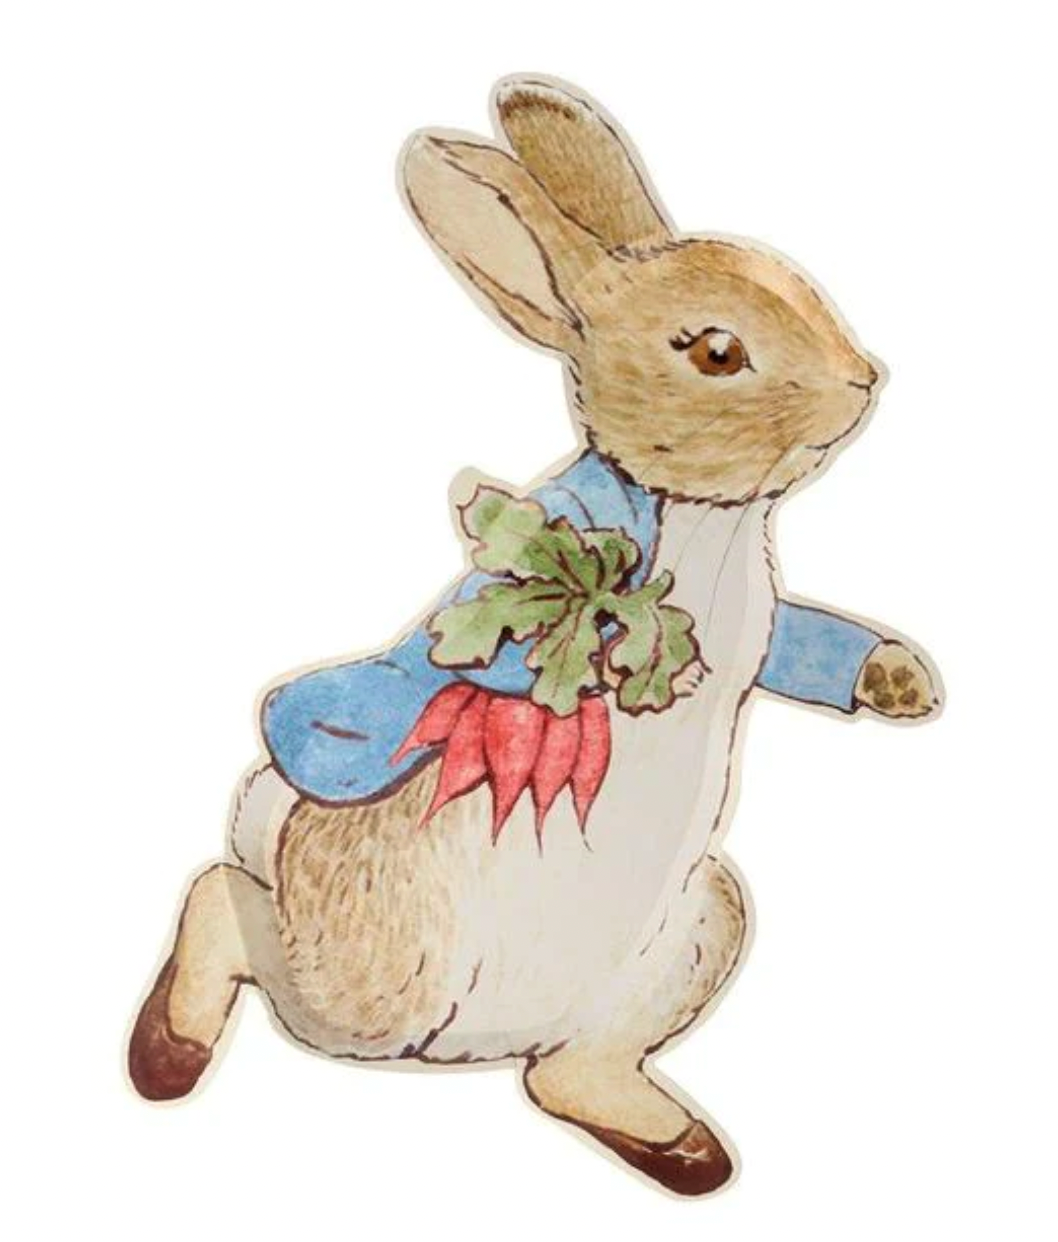 Peter rabbit shaped party plates nz